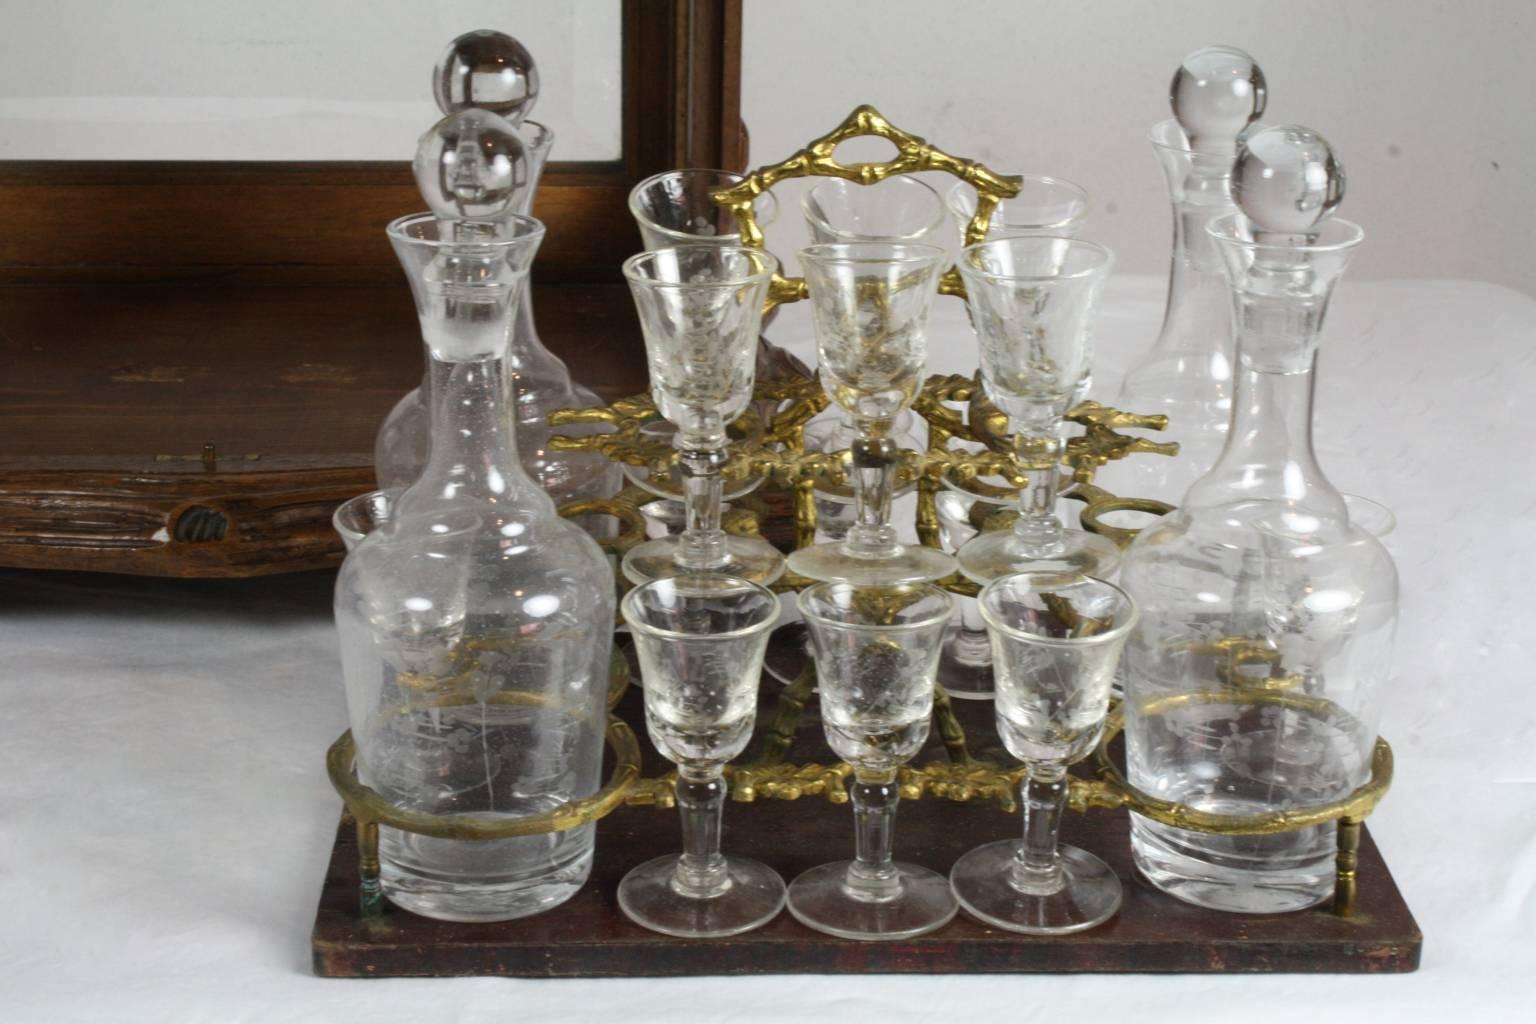 19th Century Swiss Walnut Liquor Box with Four Decanters and 16 Cordial/Aperitif Glasses For Sale